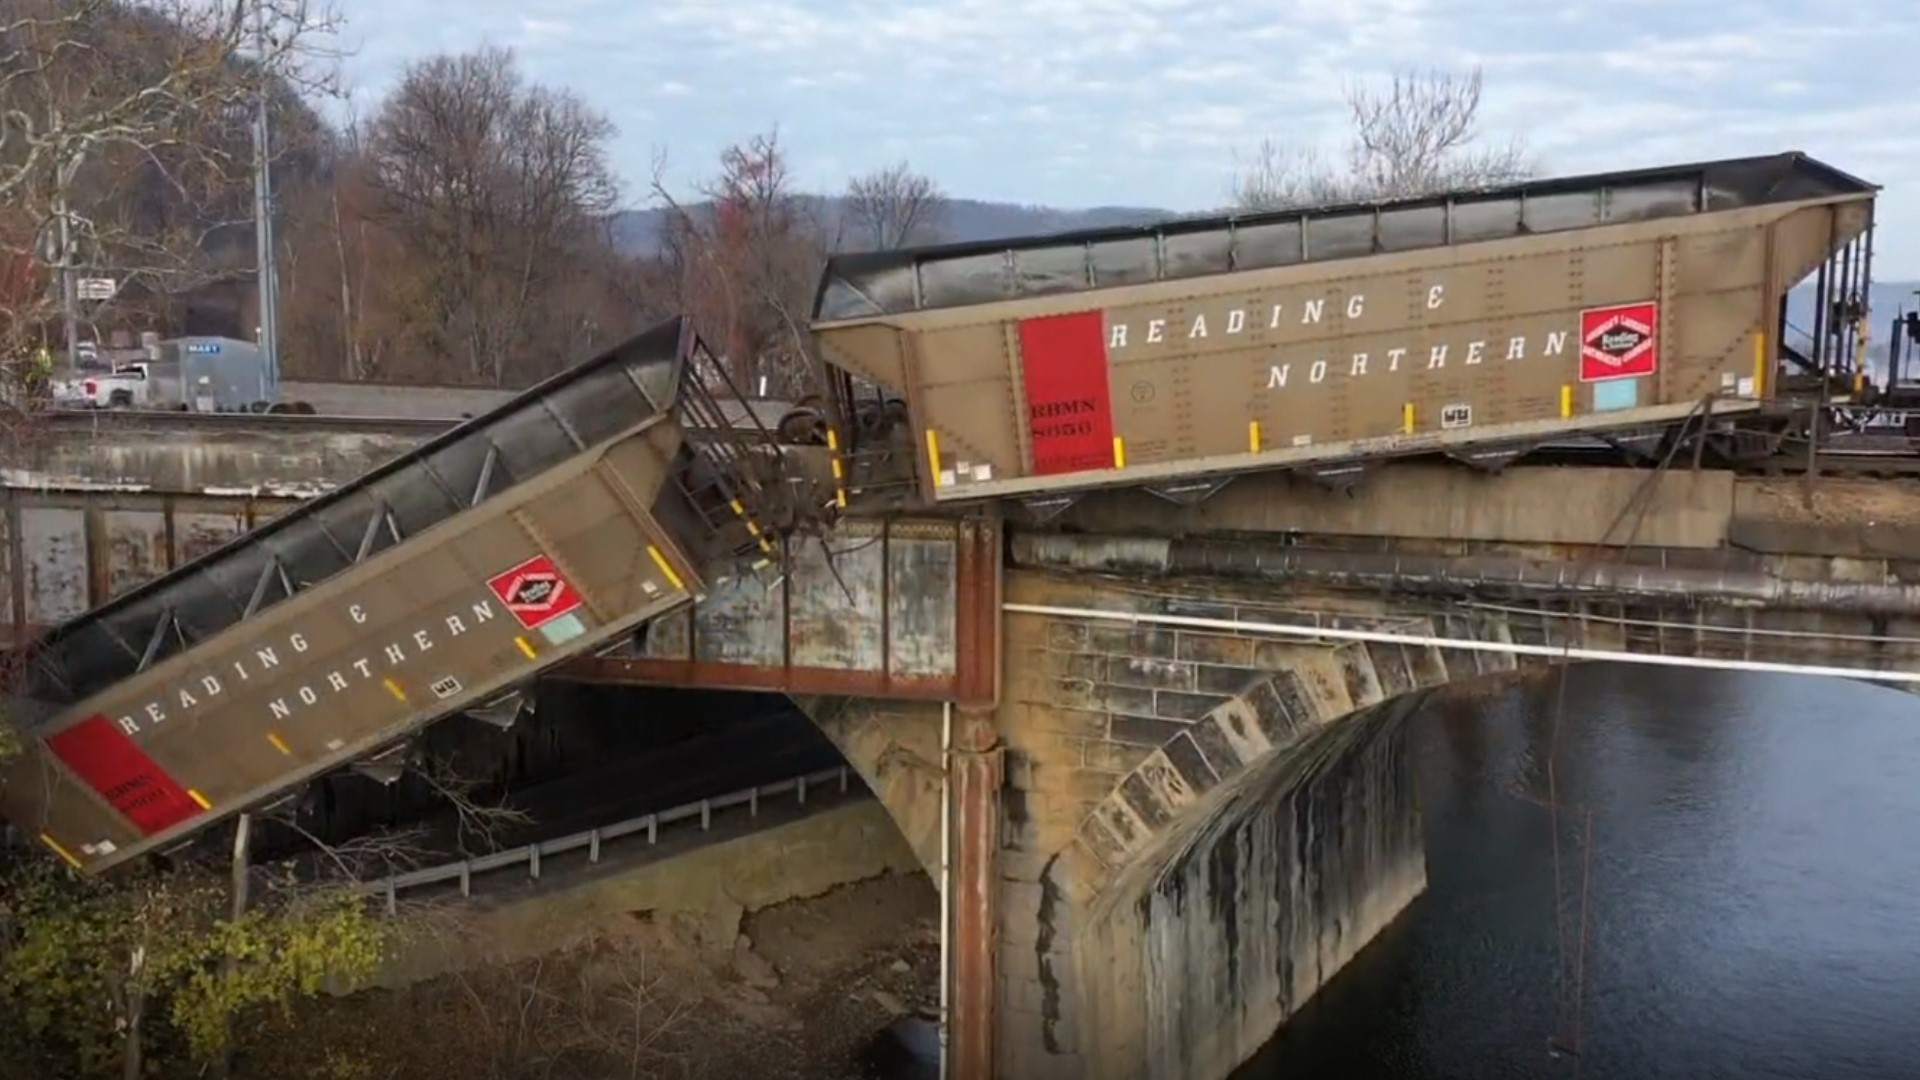 The derailment on the Rockville Bridge has closed S. Main St. in Marysville, according to emergency dispatch. The above video shows drone footage from the area.